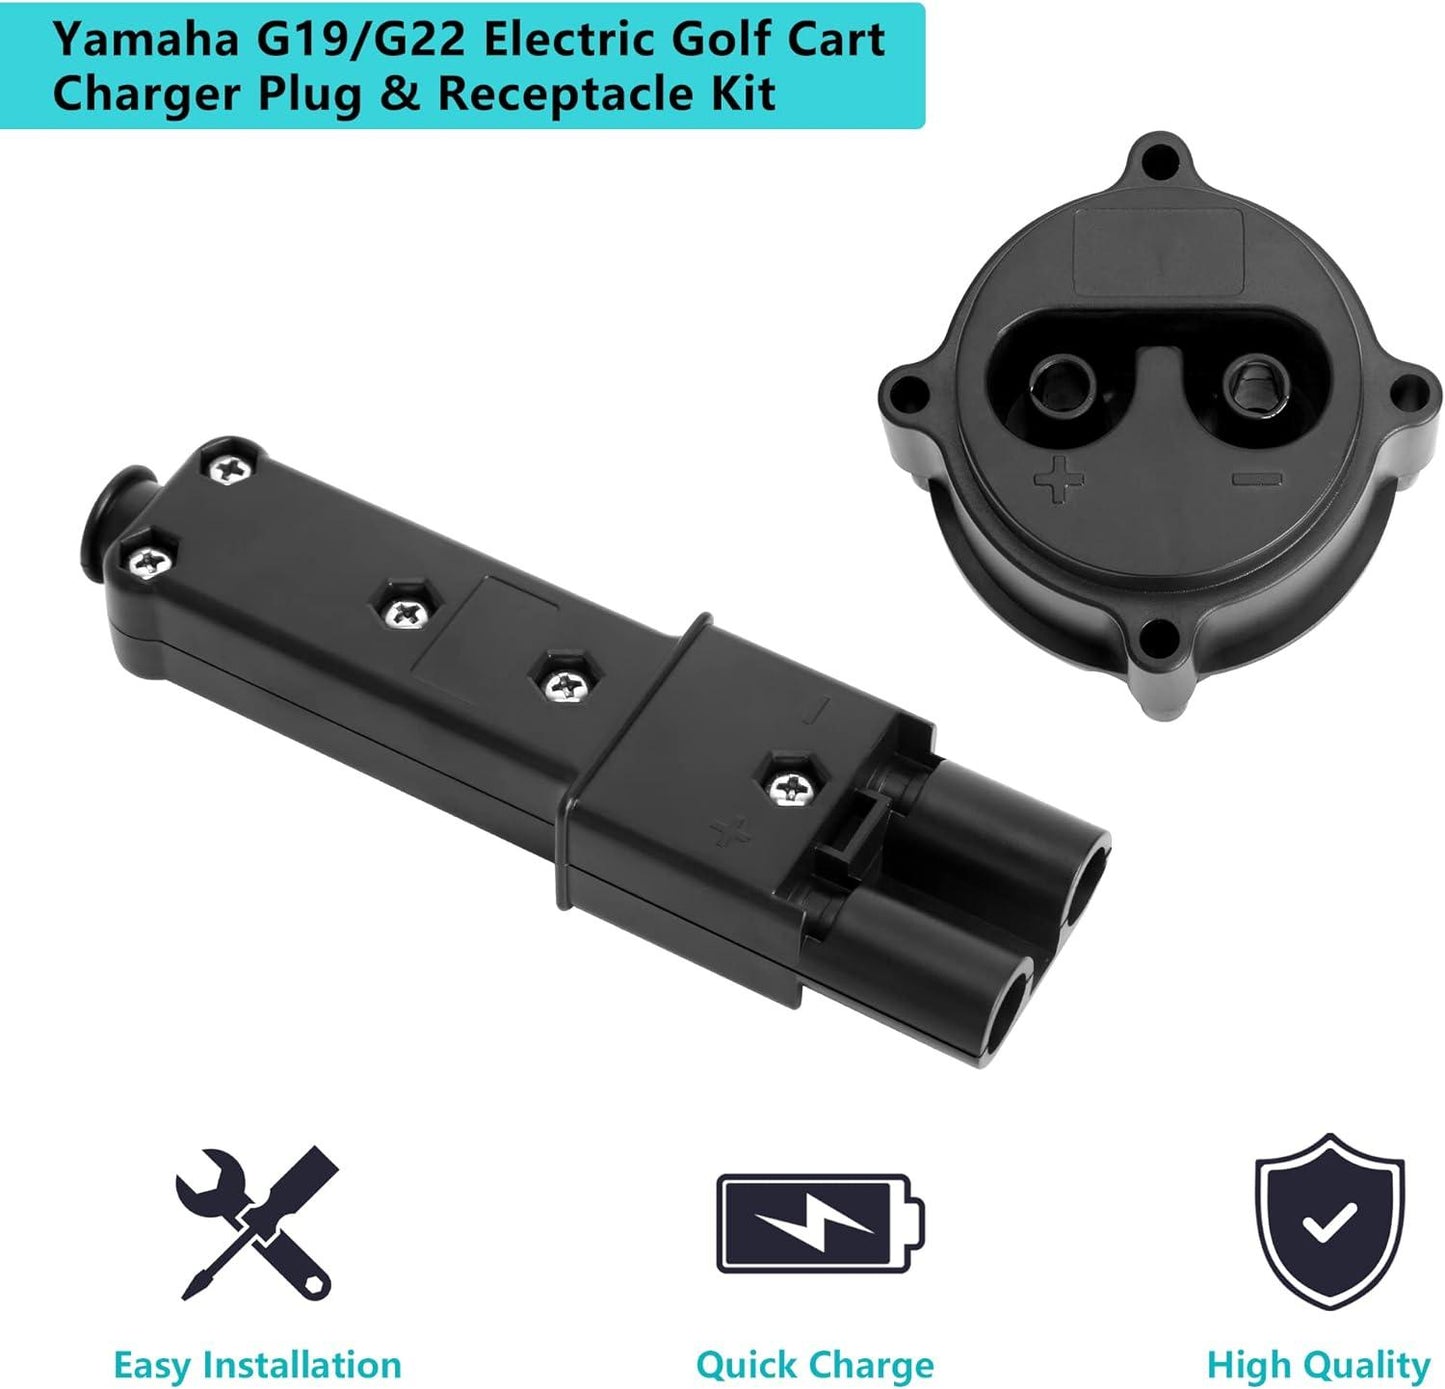 Golf Cart Charger Plug Powerwise Receptacle Kit for Yamaha G19 G22 - 10L0L Kryptex Golf Carts